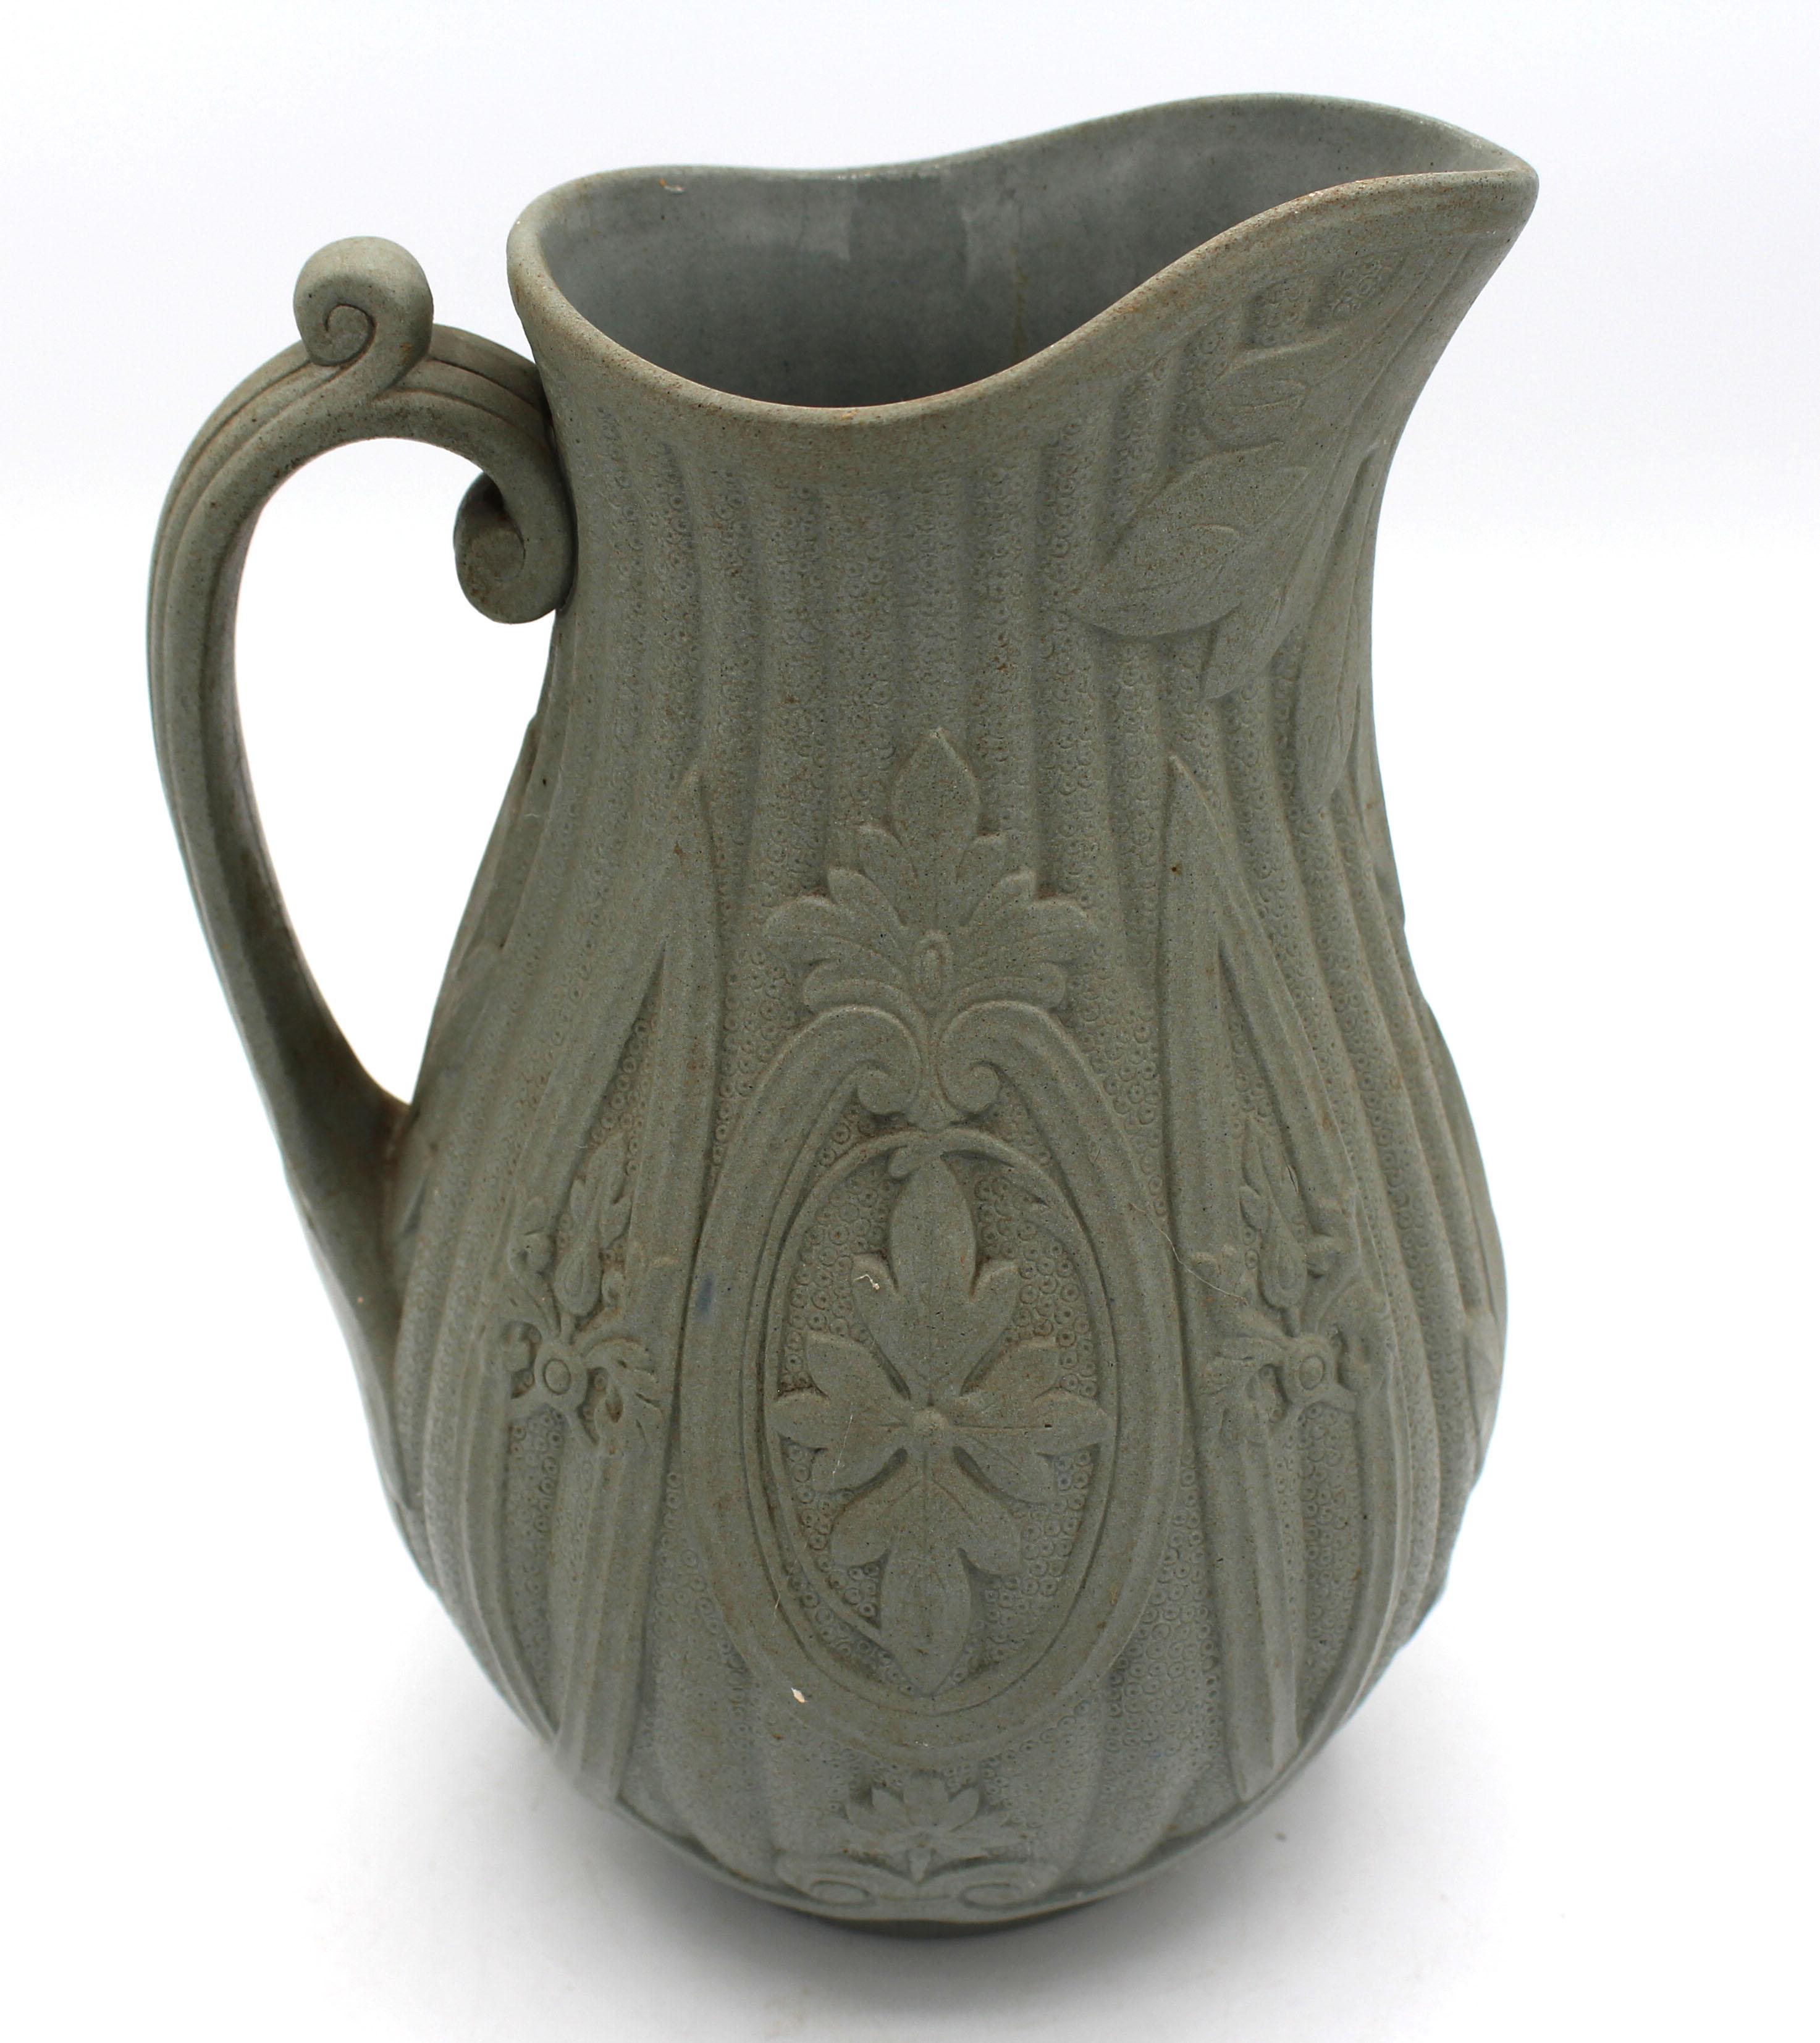 Mid-19th century salt glazed stoneware pitcher, English. Relief molded in soft green with neoclassical motifs. Known parian examples also unattributed. Marked: W, 12. Provenance: Estate of Katherine Reid, former Director of the Cleveland Museum of